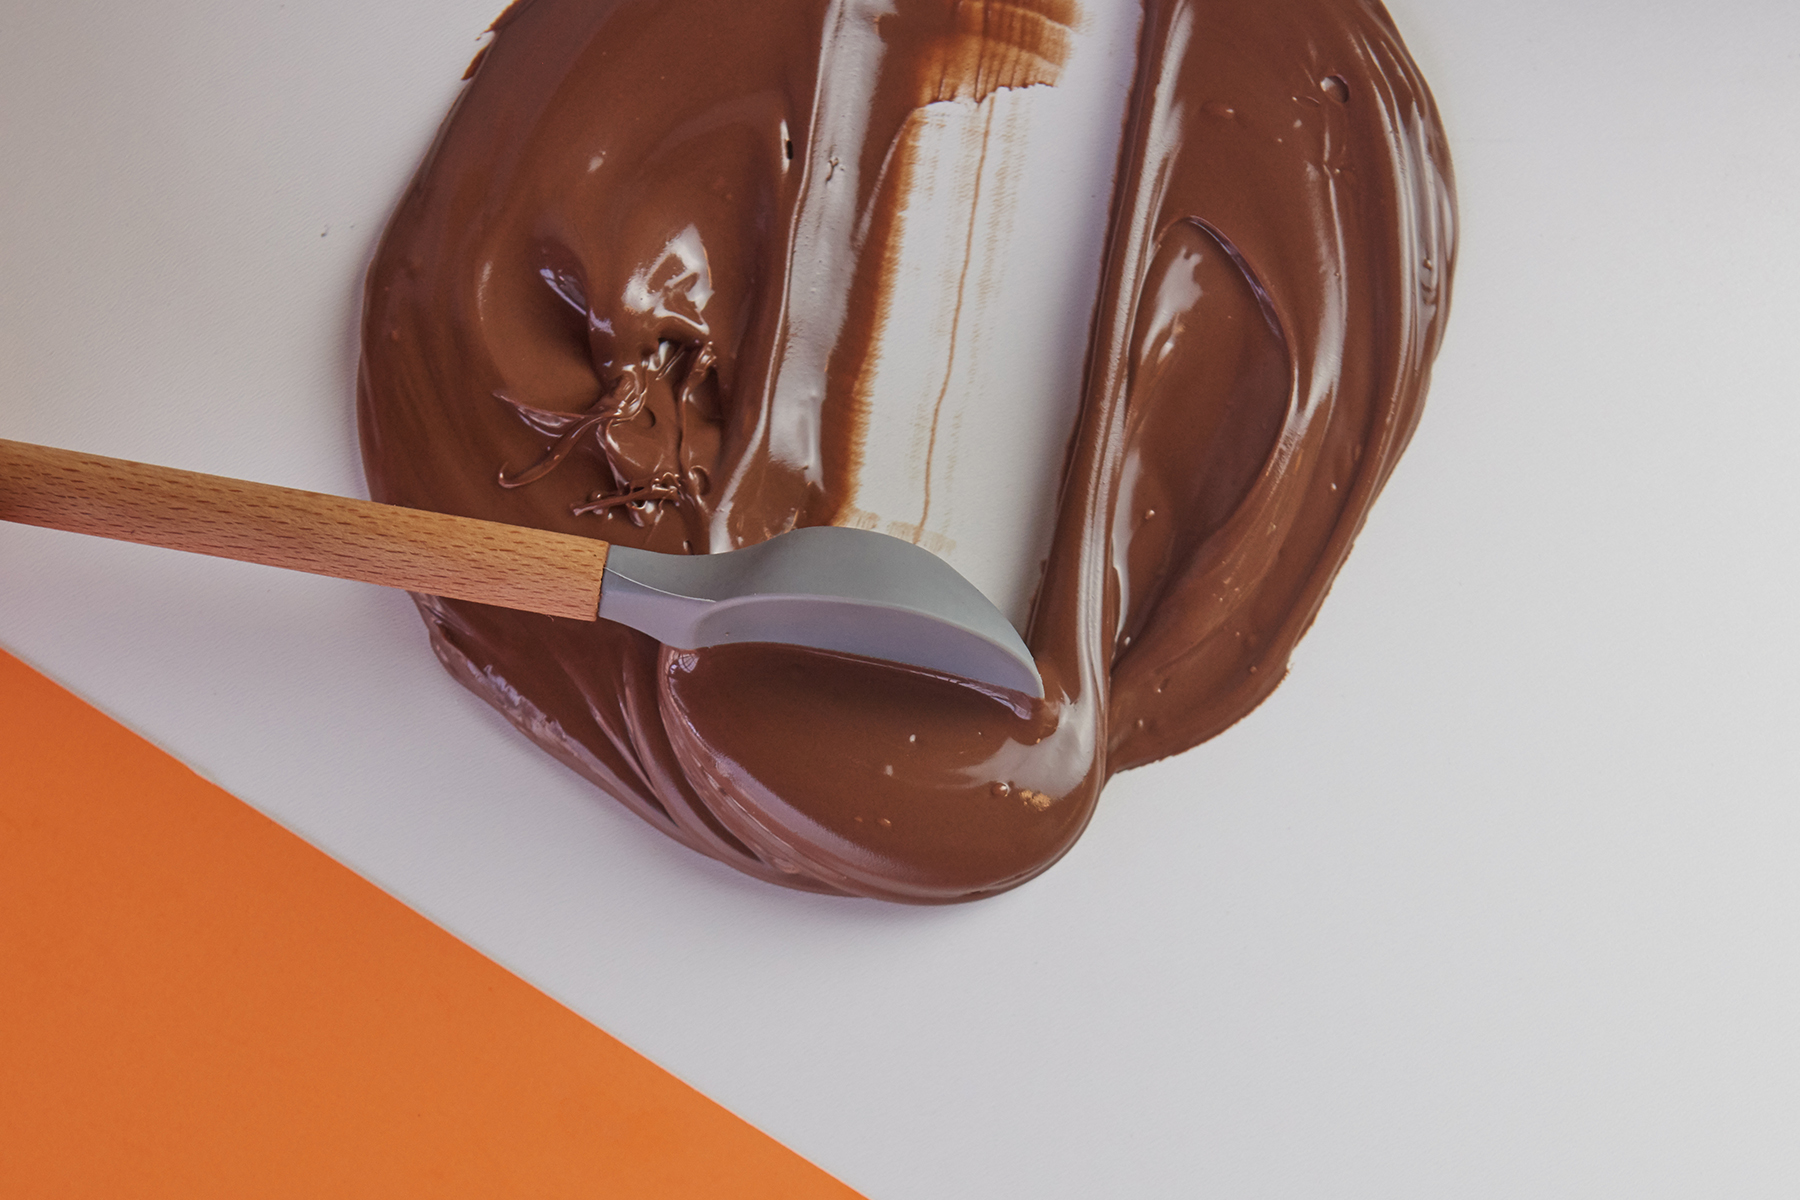 PBspoon - the perfect spoon for peanut butter consumption